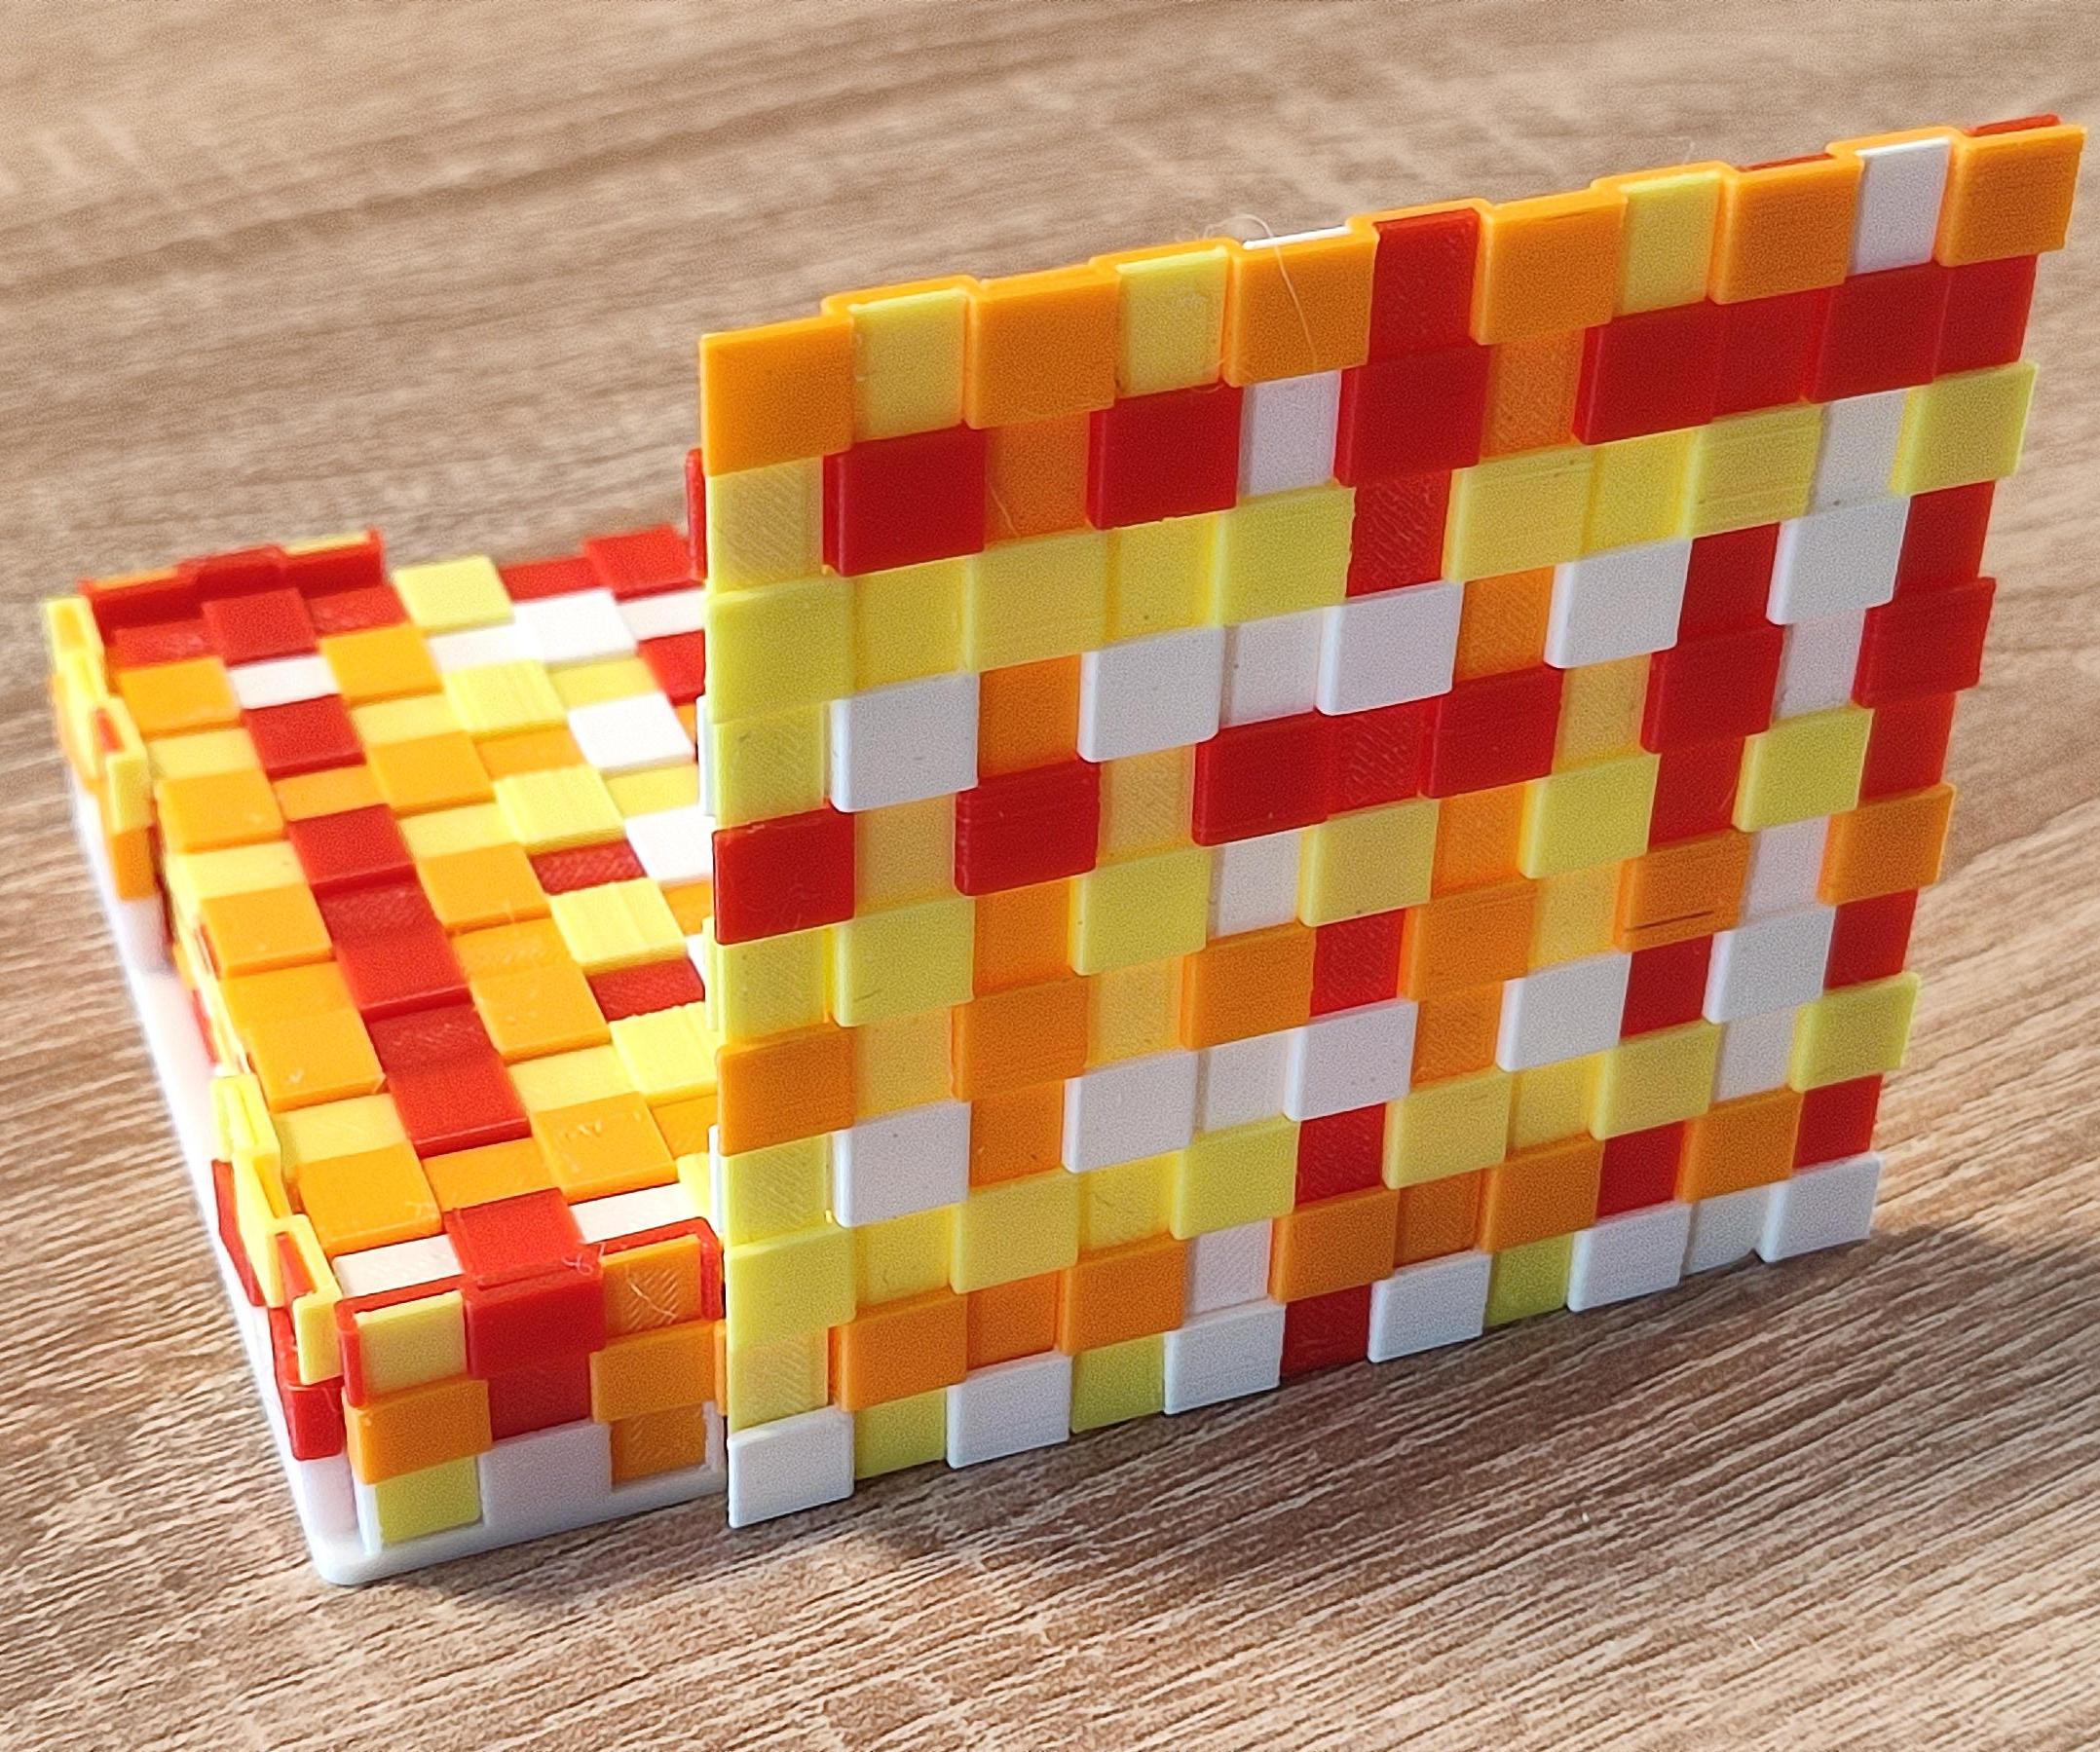 Crafting Woven-Look Coasters With 3D Printing